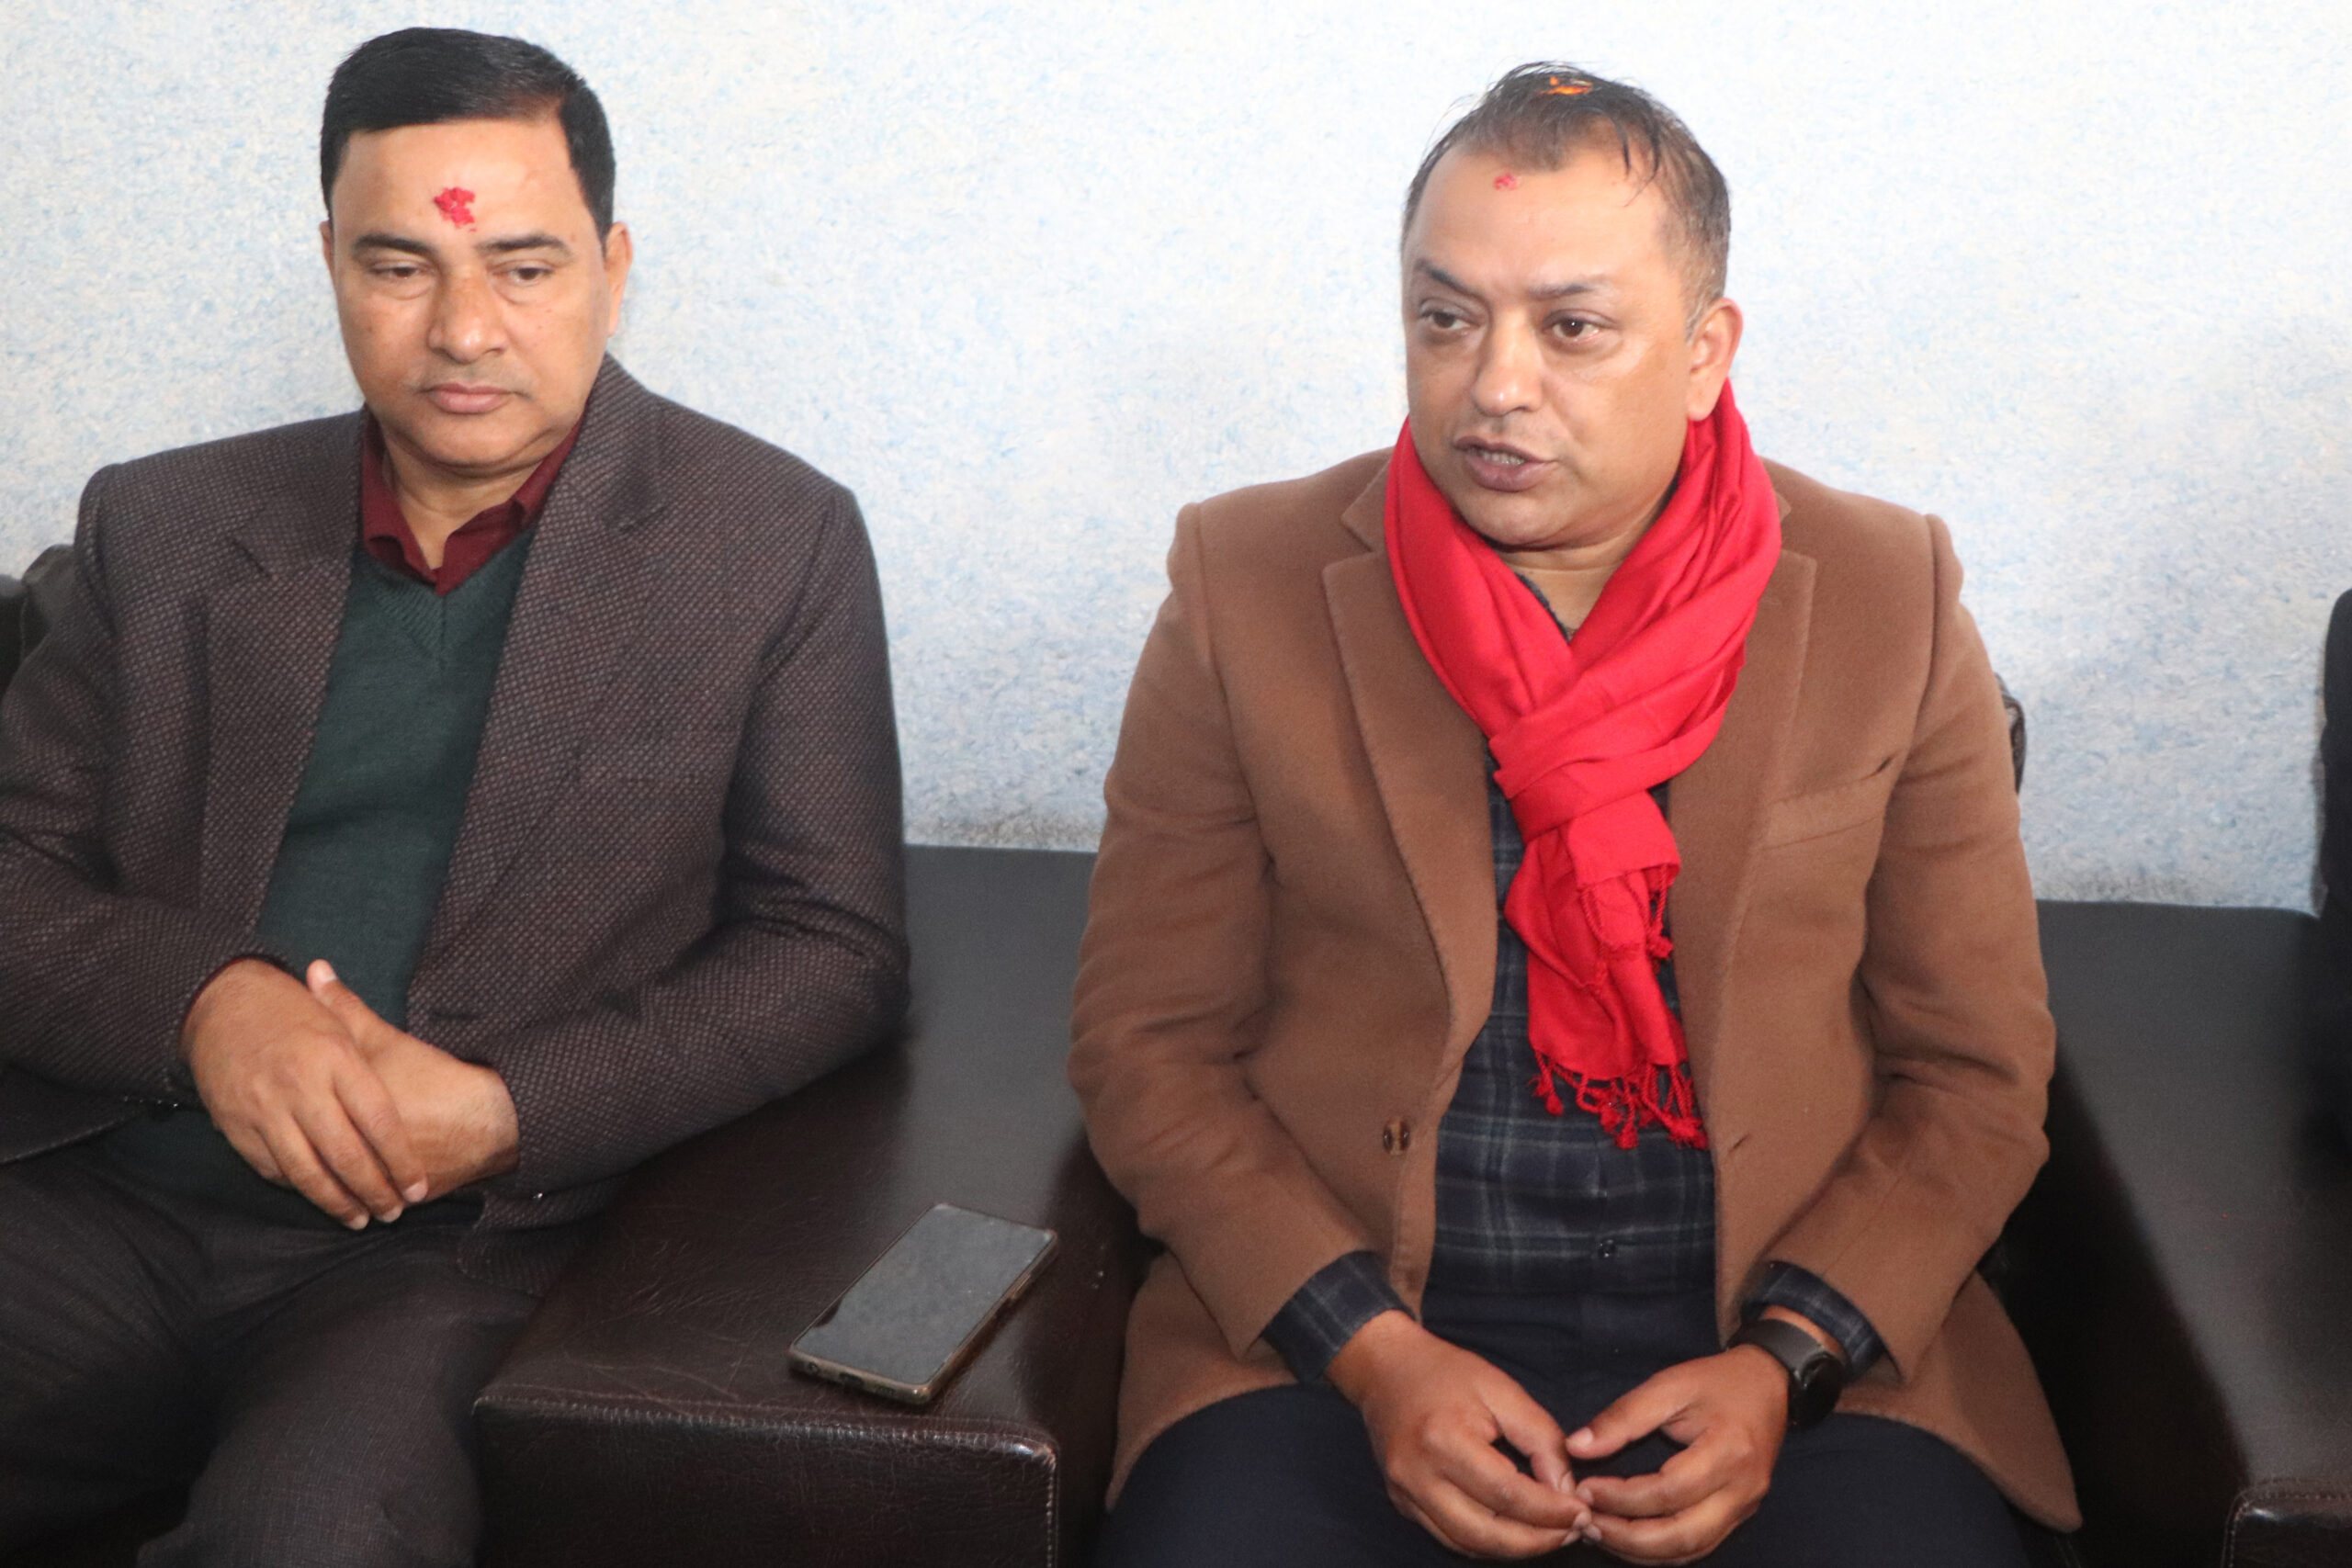 Civilian grievance against government has surged: Gagan Thapa